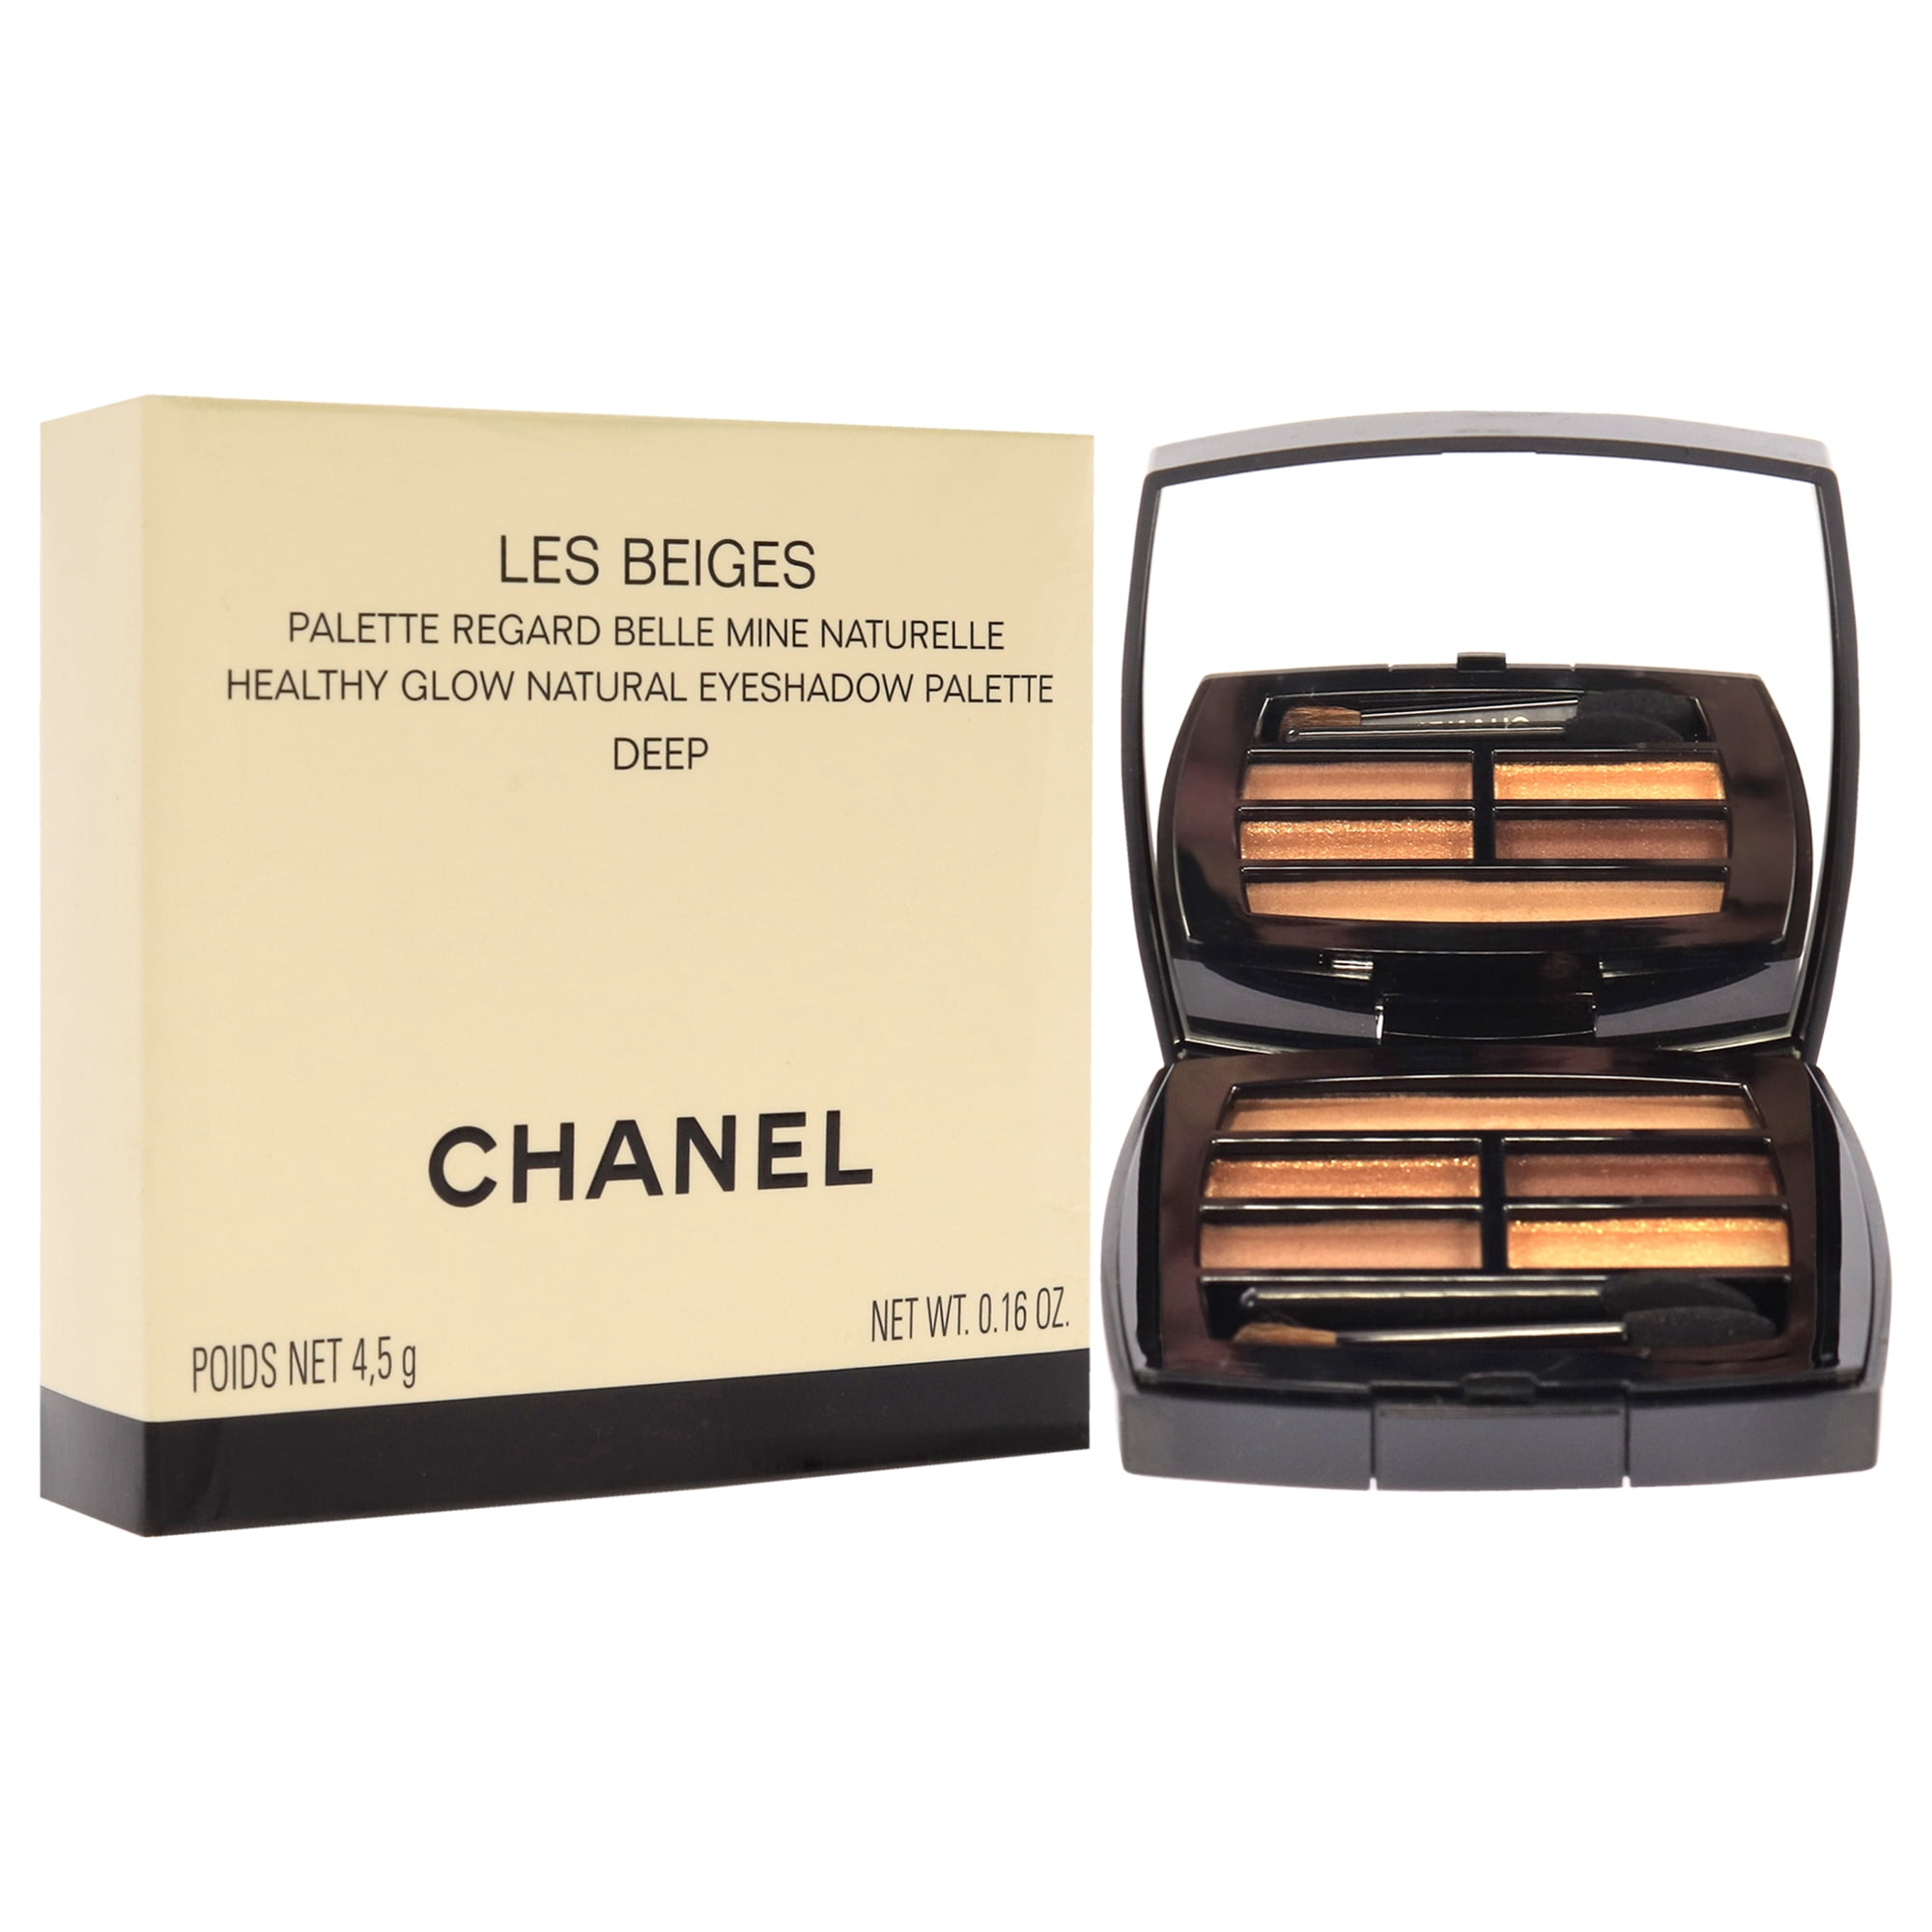 Chanel Healthy Glow Les Beiges Healthy Glow Natural Eyeshadow Palette,  Medium, 0.16 oz/4.5 g Ingredients and Reviews